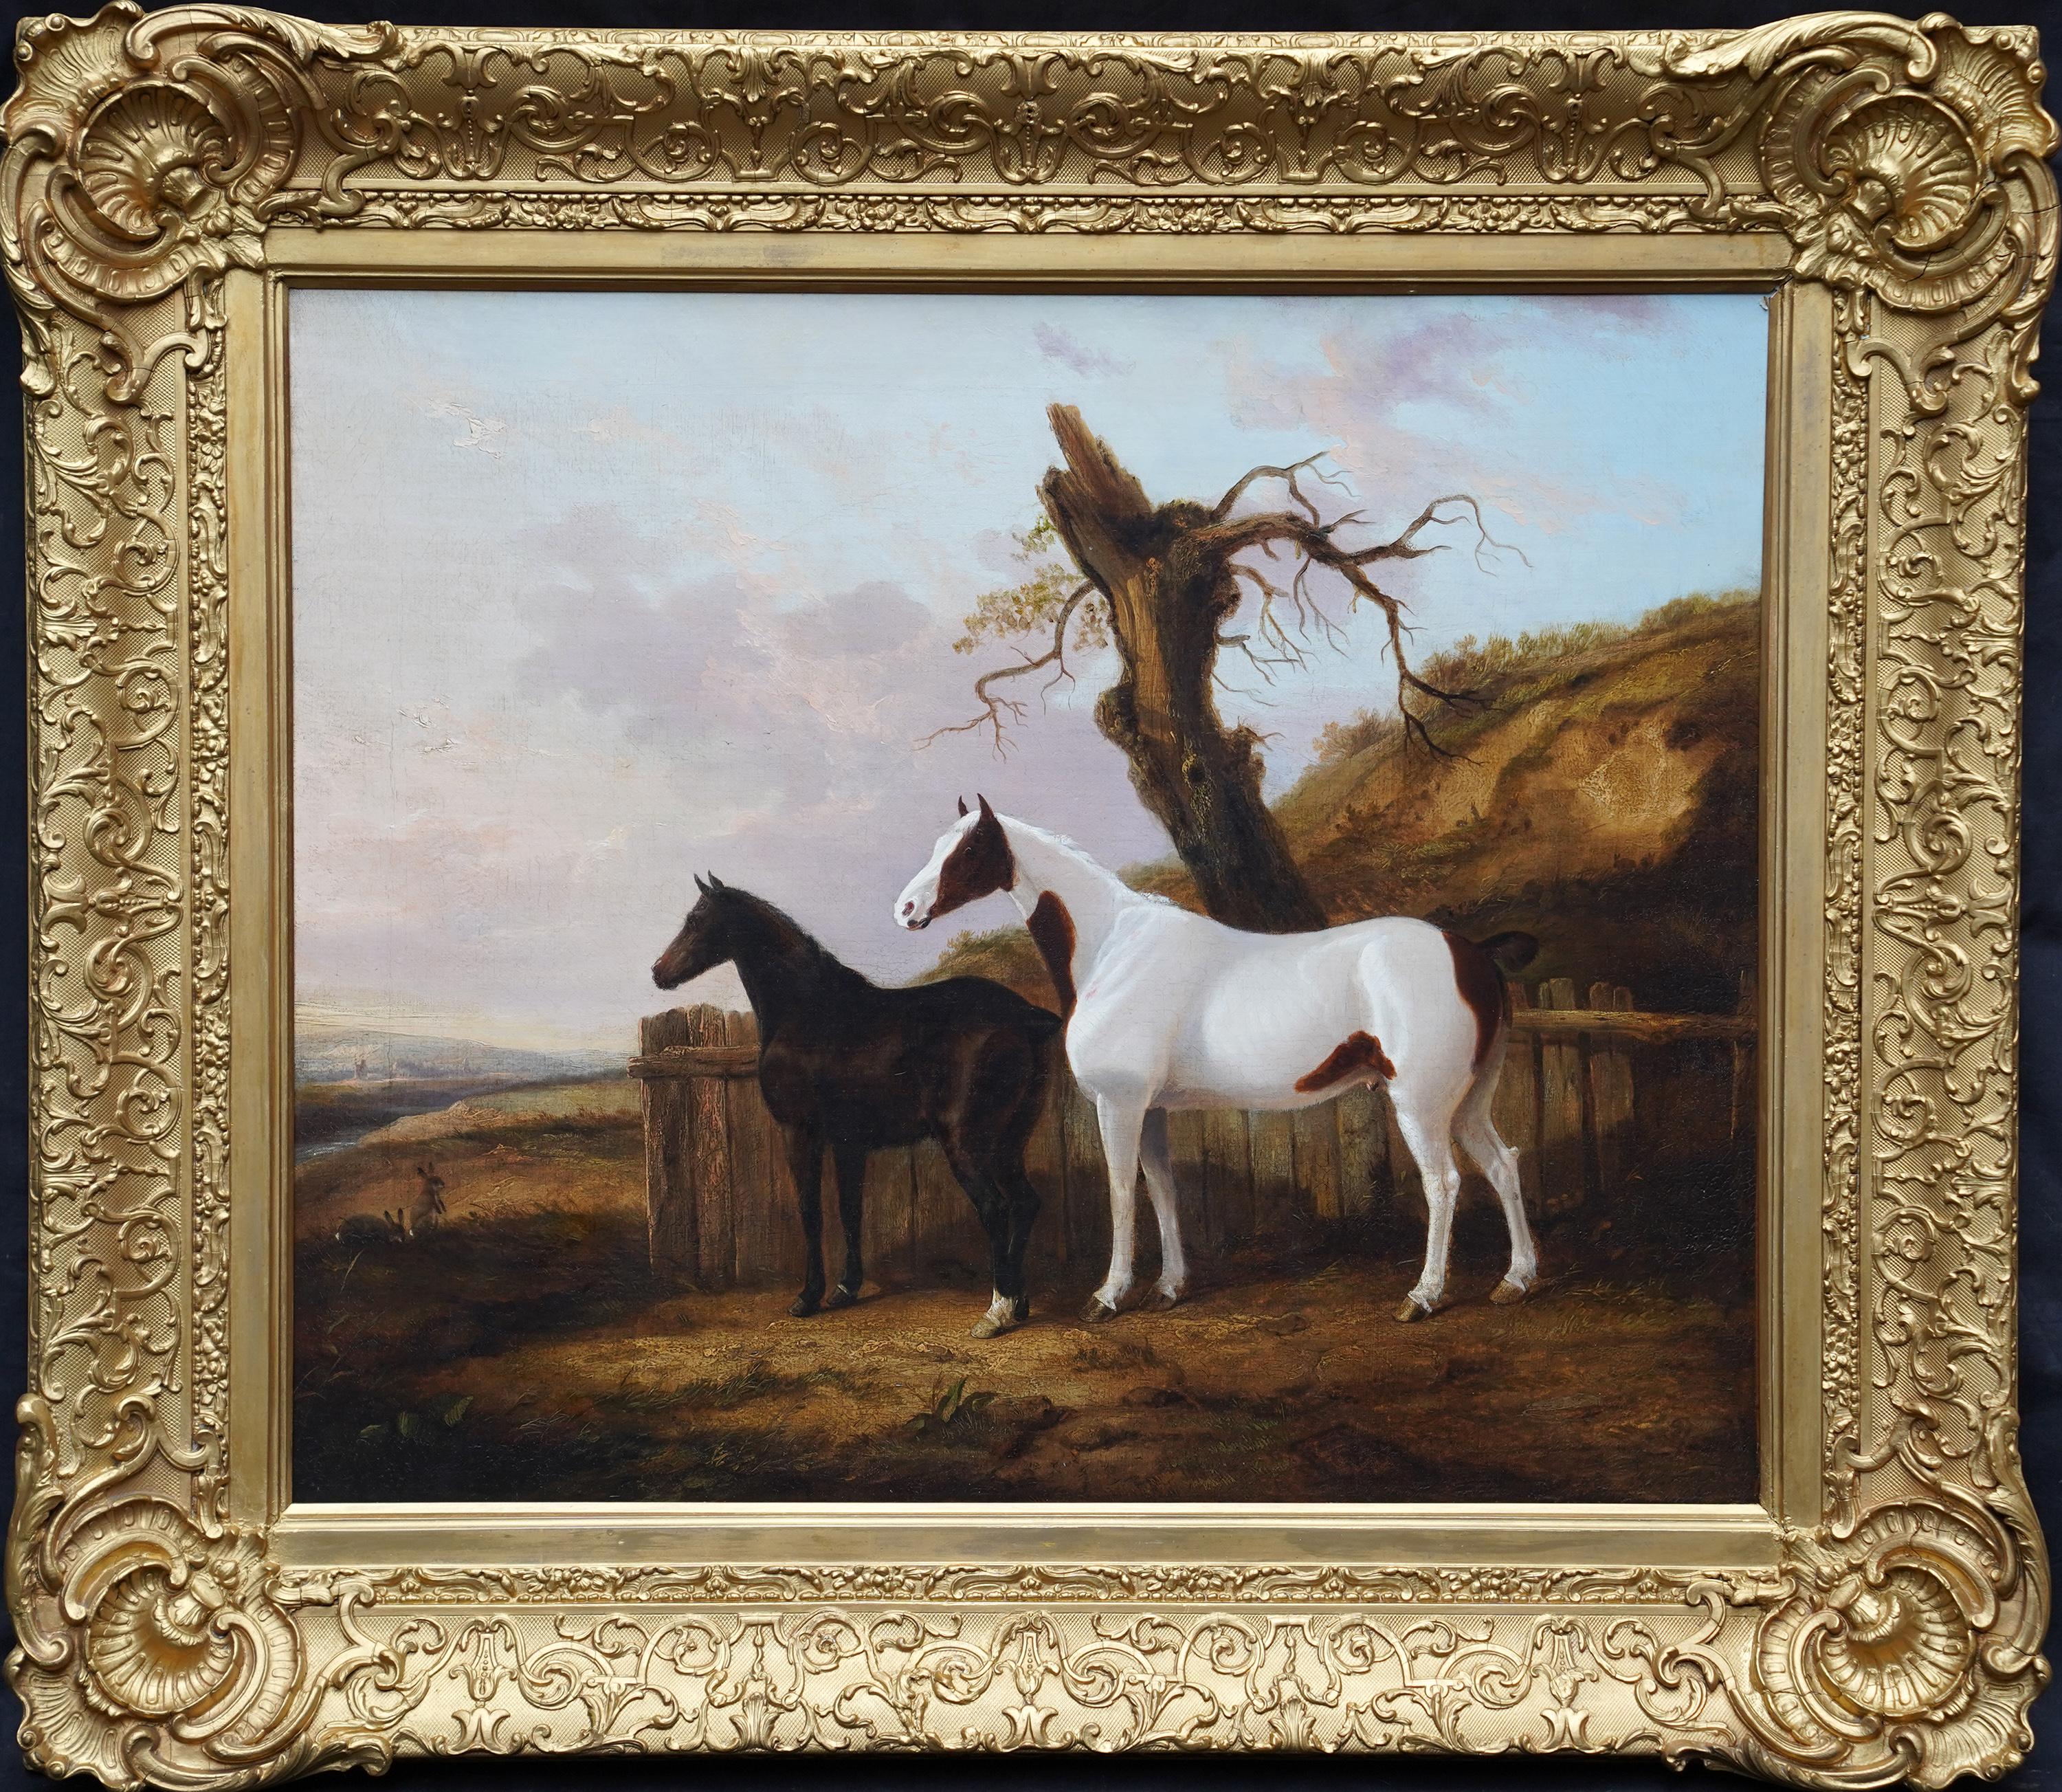 George Cole Landscape Painting - Portrait of Two Horses in a Landscape - British 19thC equine art oil painting